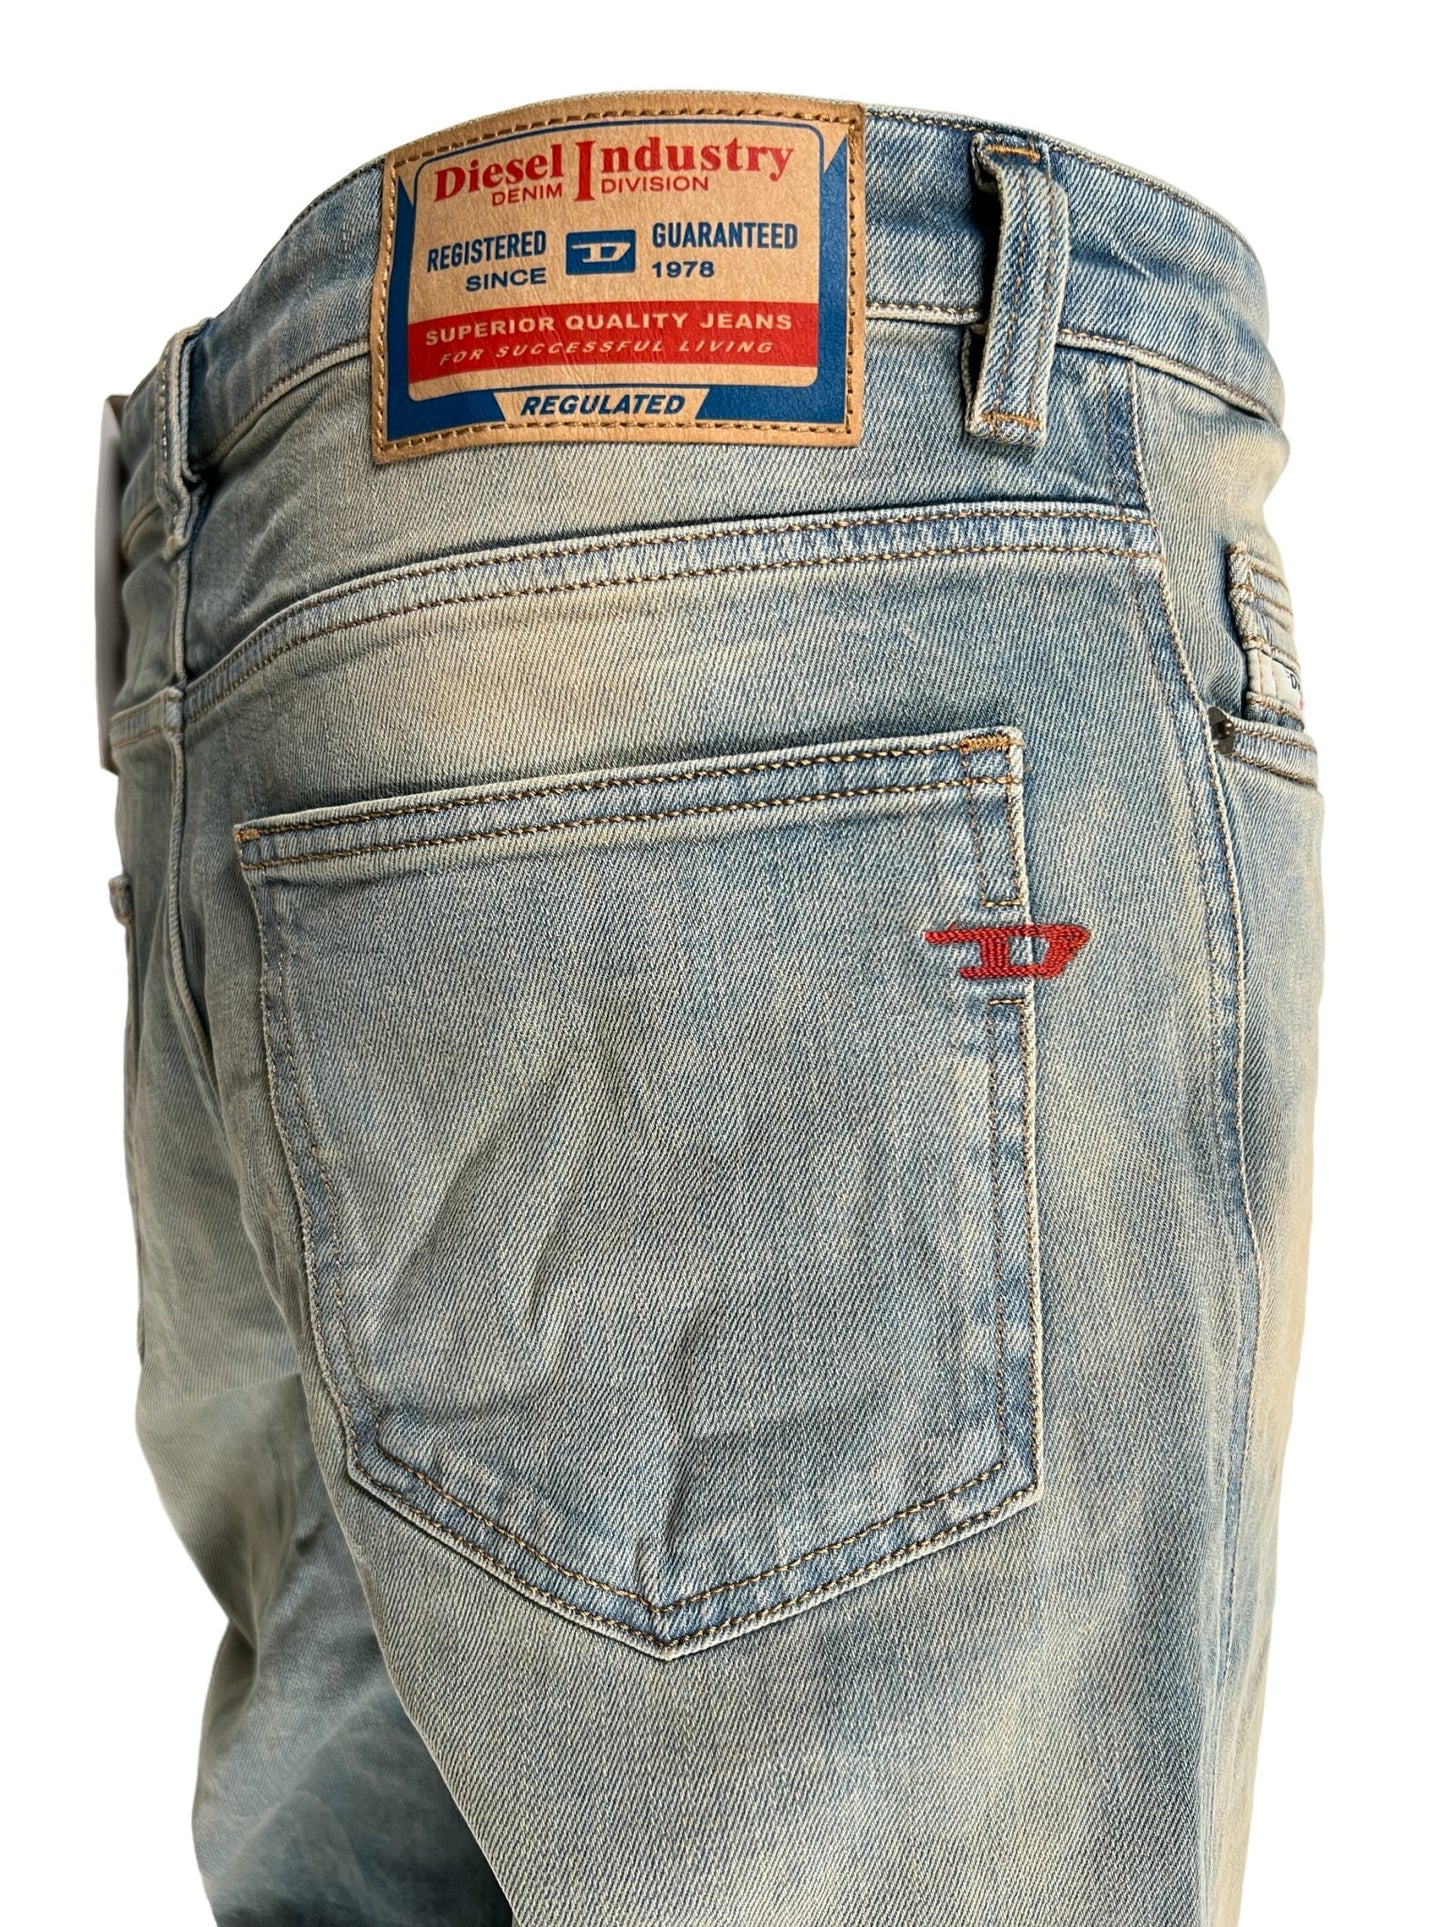 Close-up of the back pocket and waistband label on a pair of DIESEL bootcut jeans.